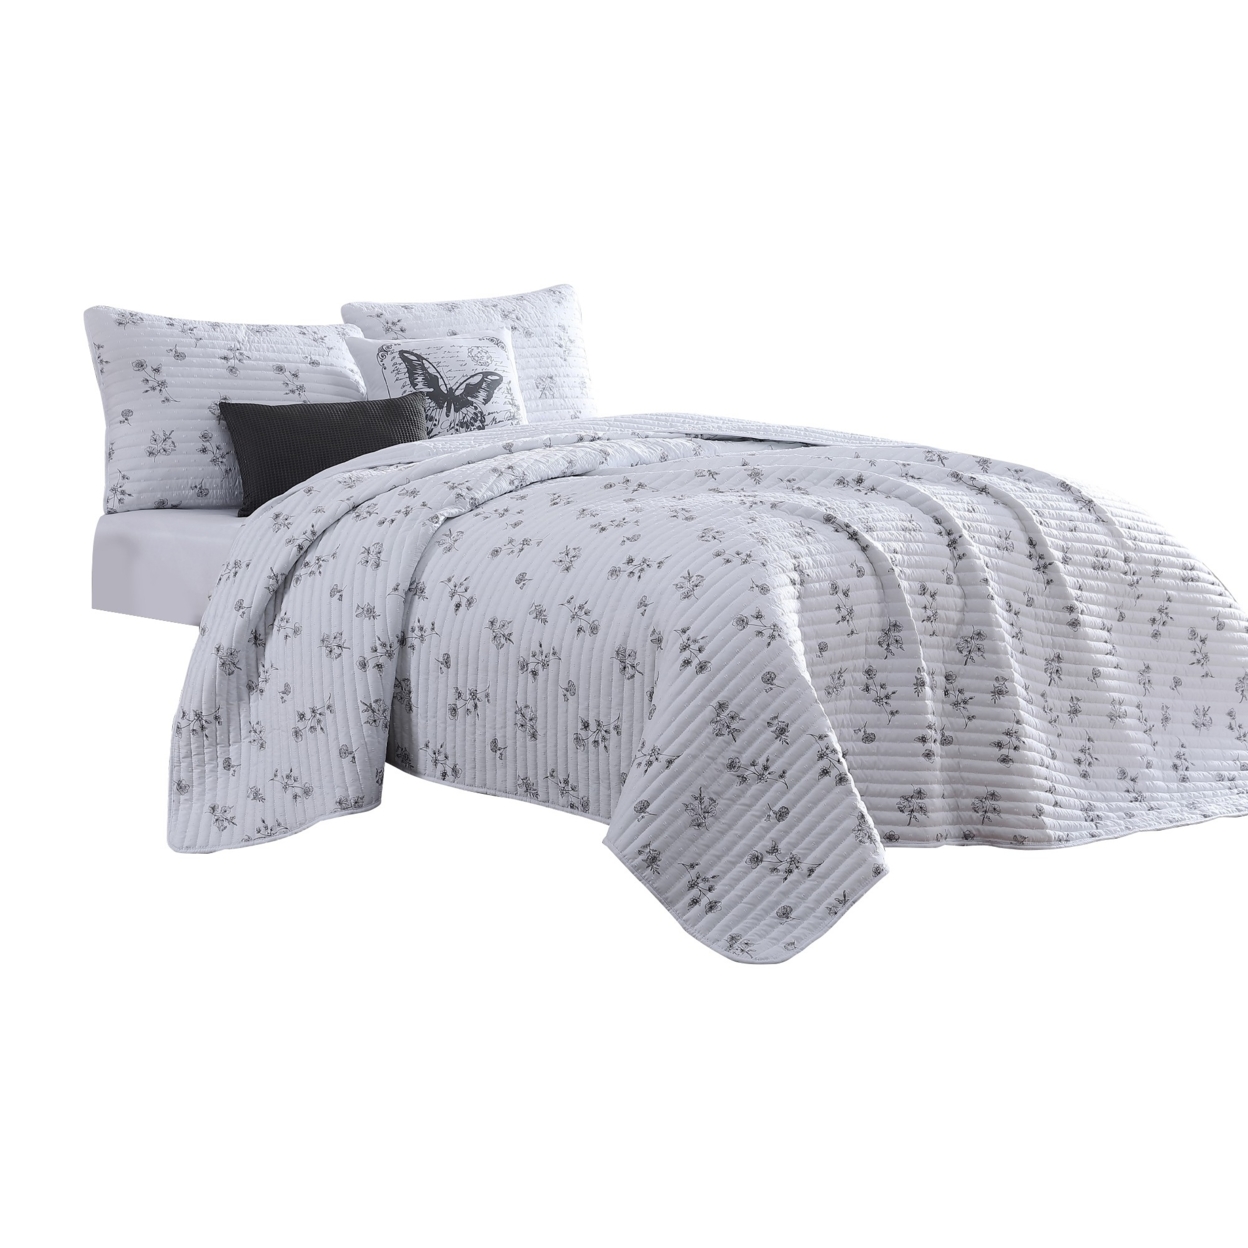 Veria 5 Piece King Quilt Set With Floral Print The Urban Port, White And Gray- Saltoro Sherpi